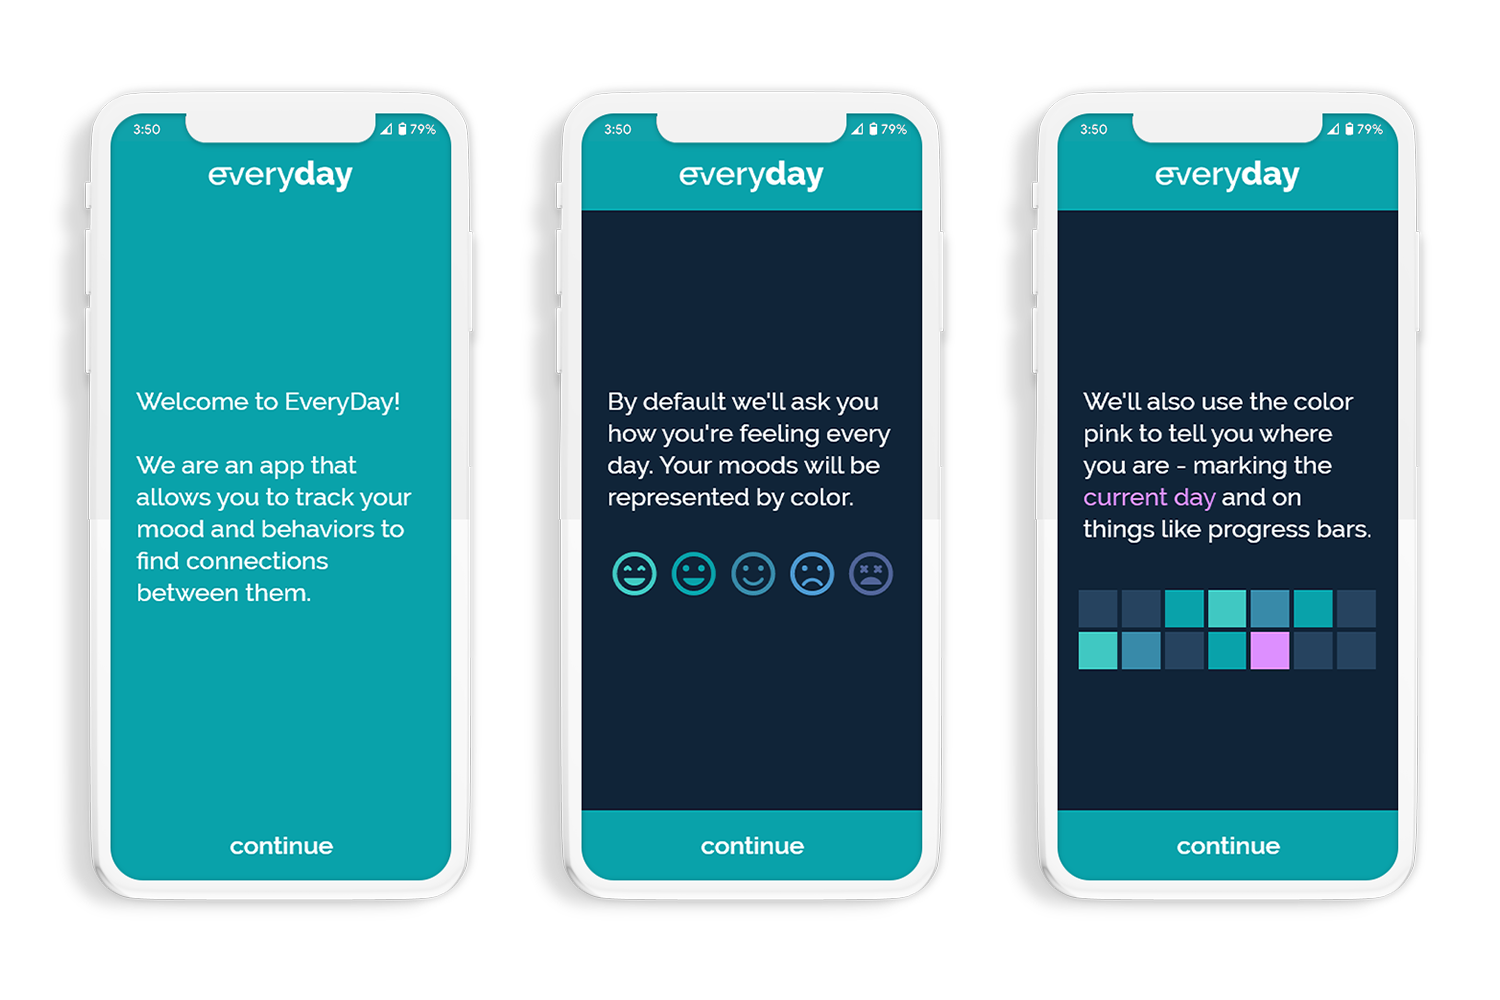 mobile mockups of Everyday's intro user flow